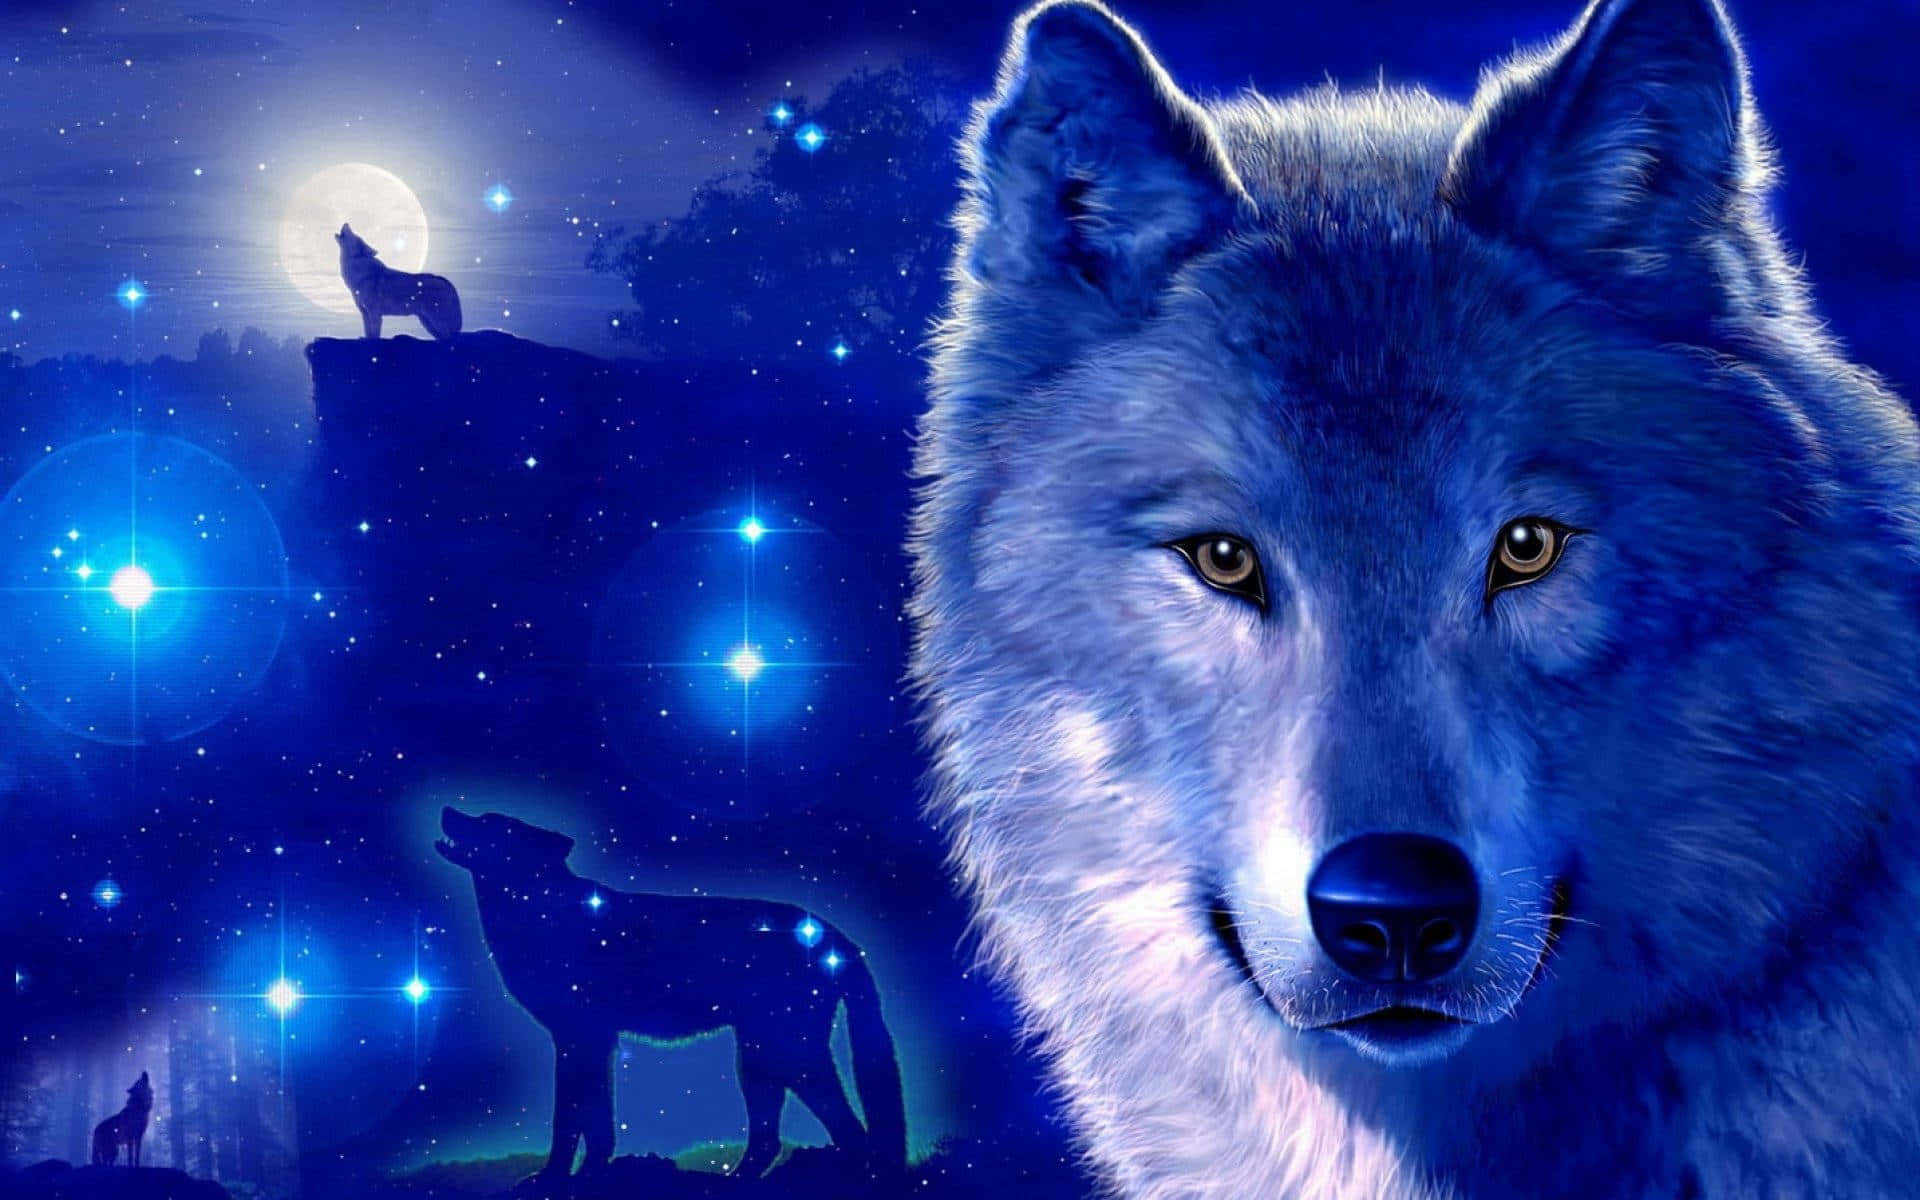 Experience the beauty of the stars with Galaxy Wolf